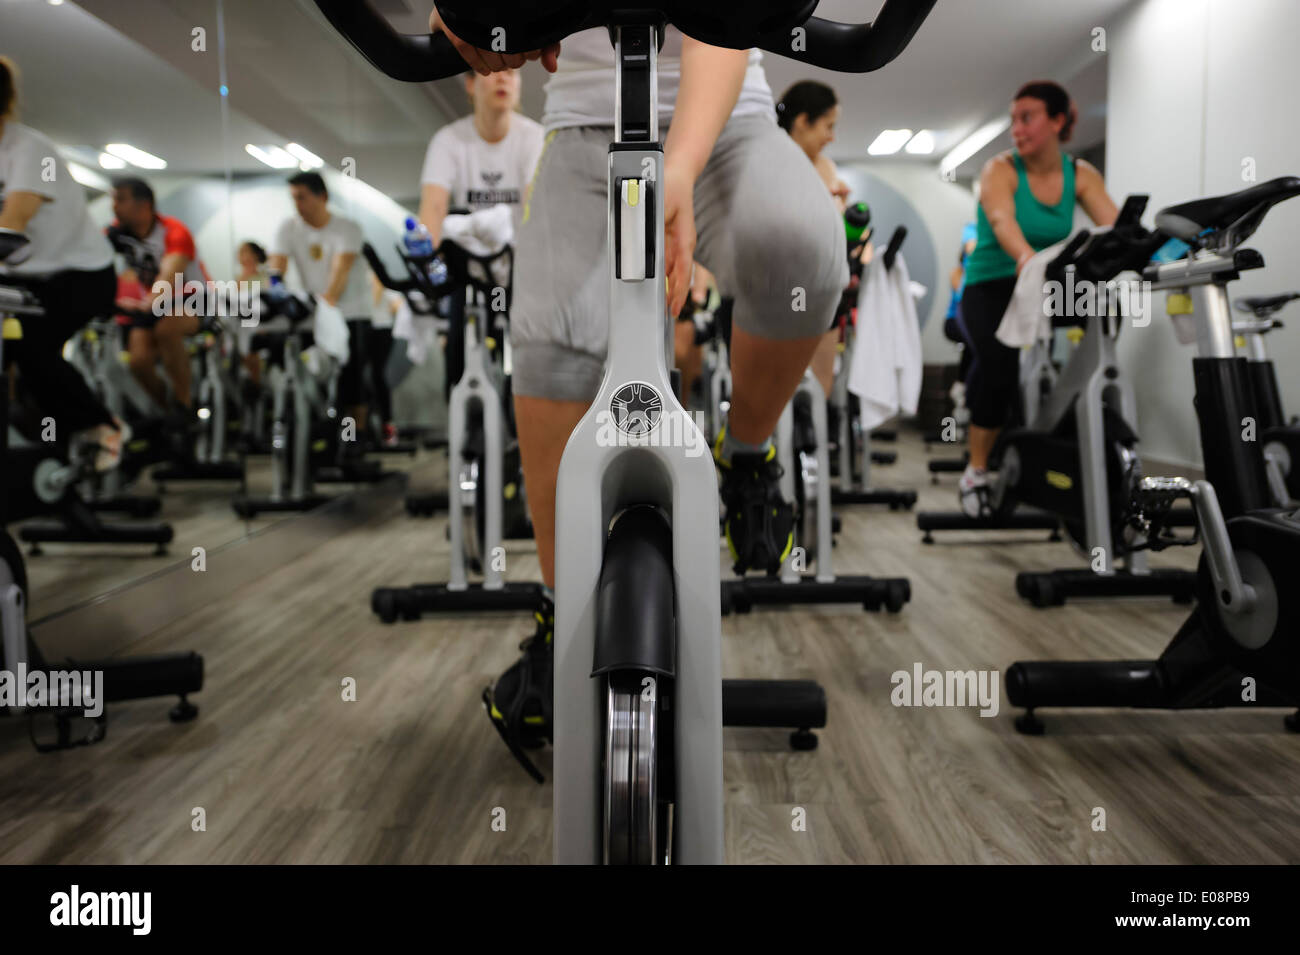 Woman adjusting her stationary bicycle during a spinning class at the gym Stock Photo